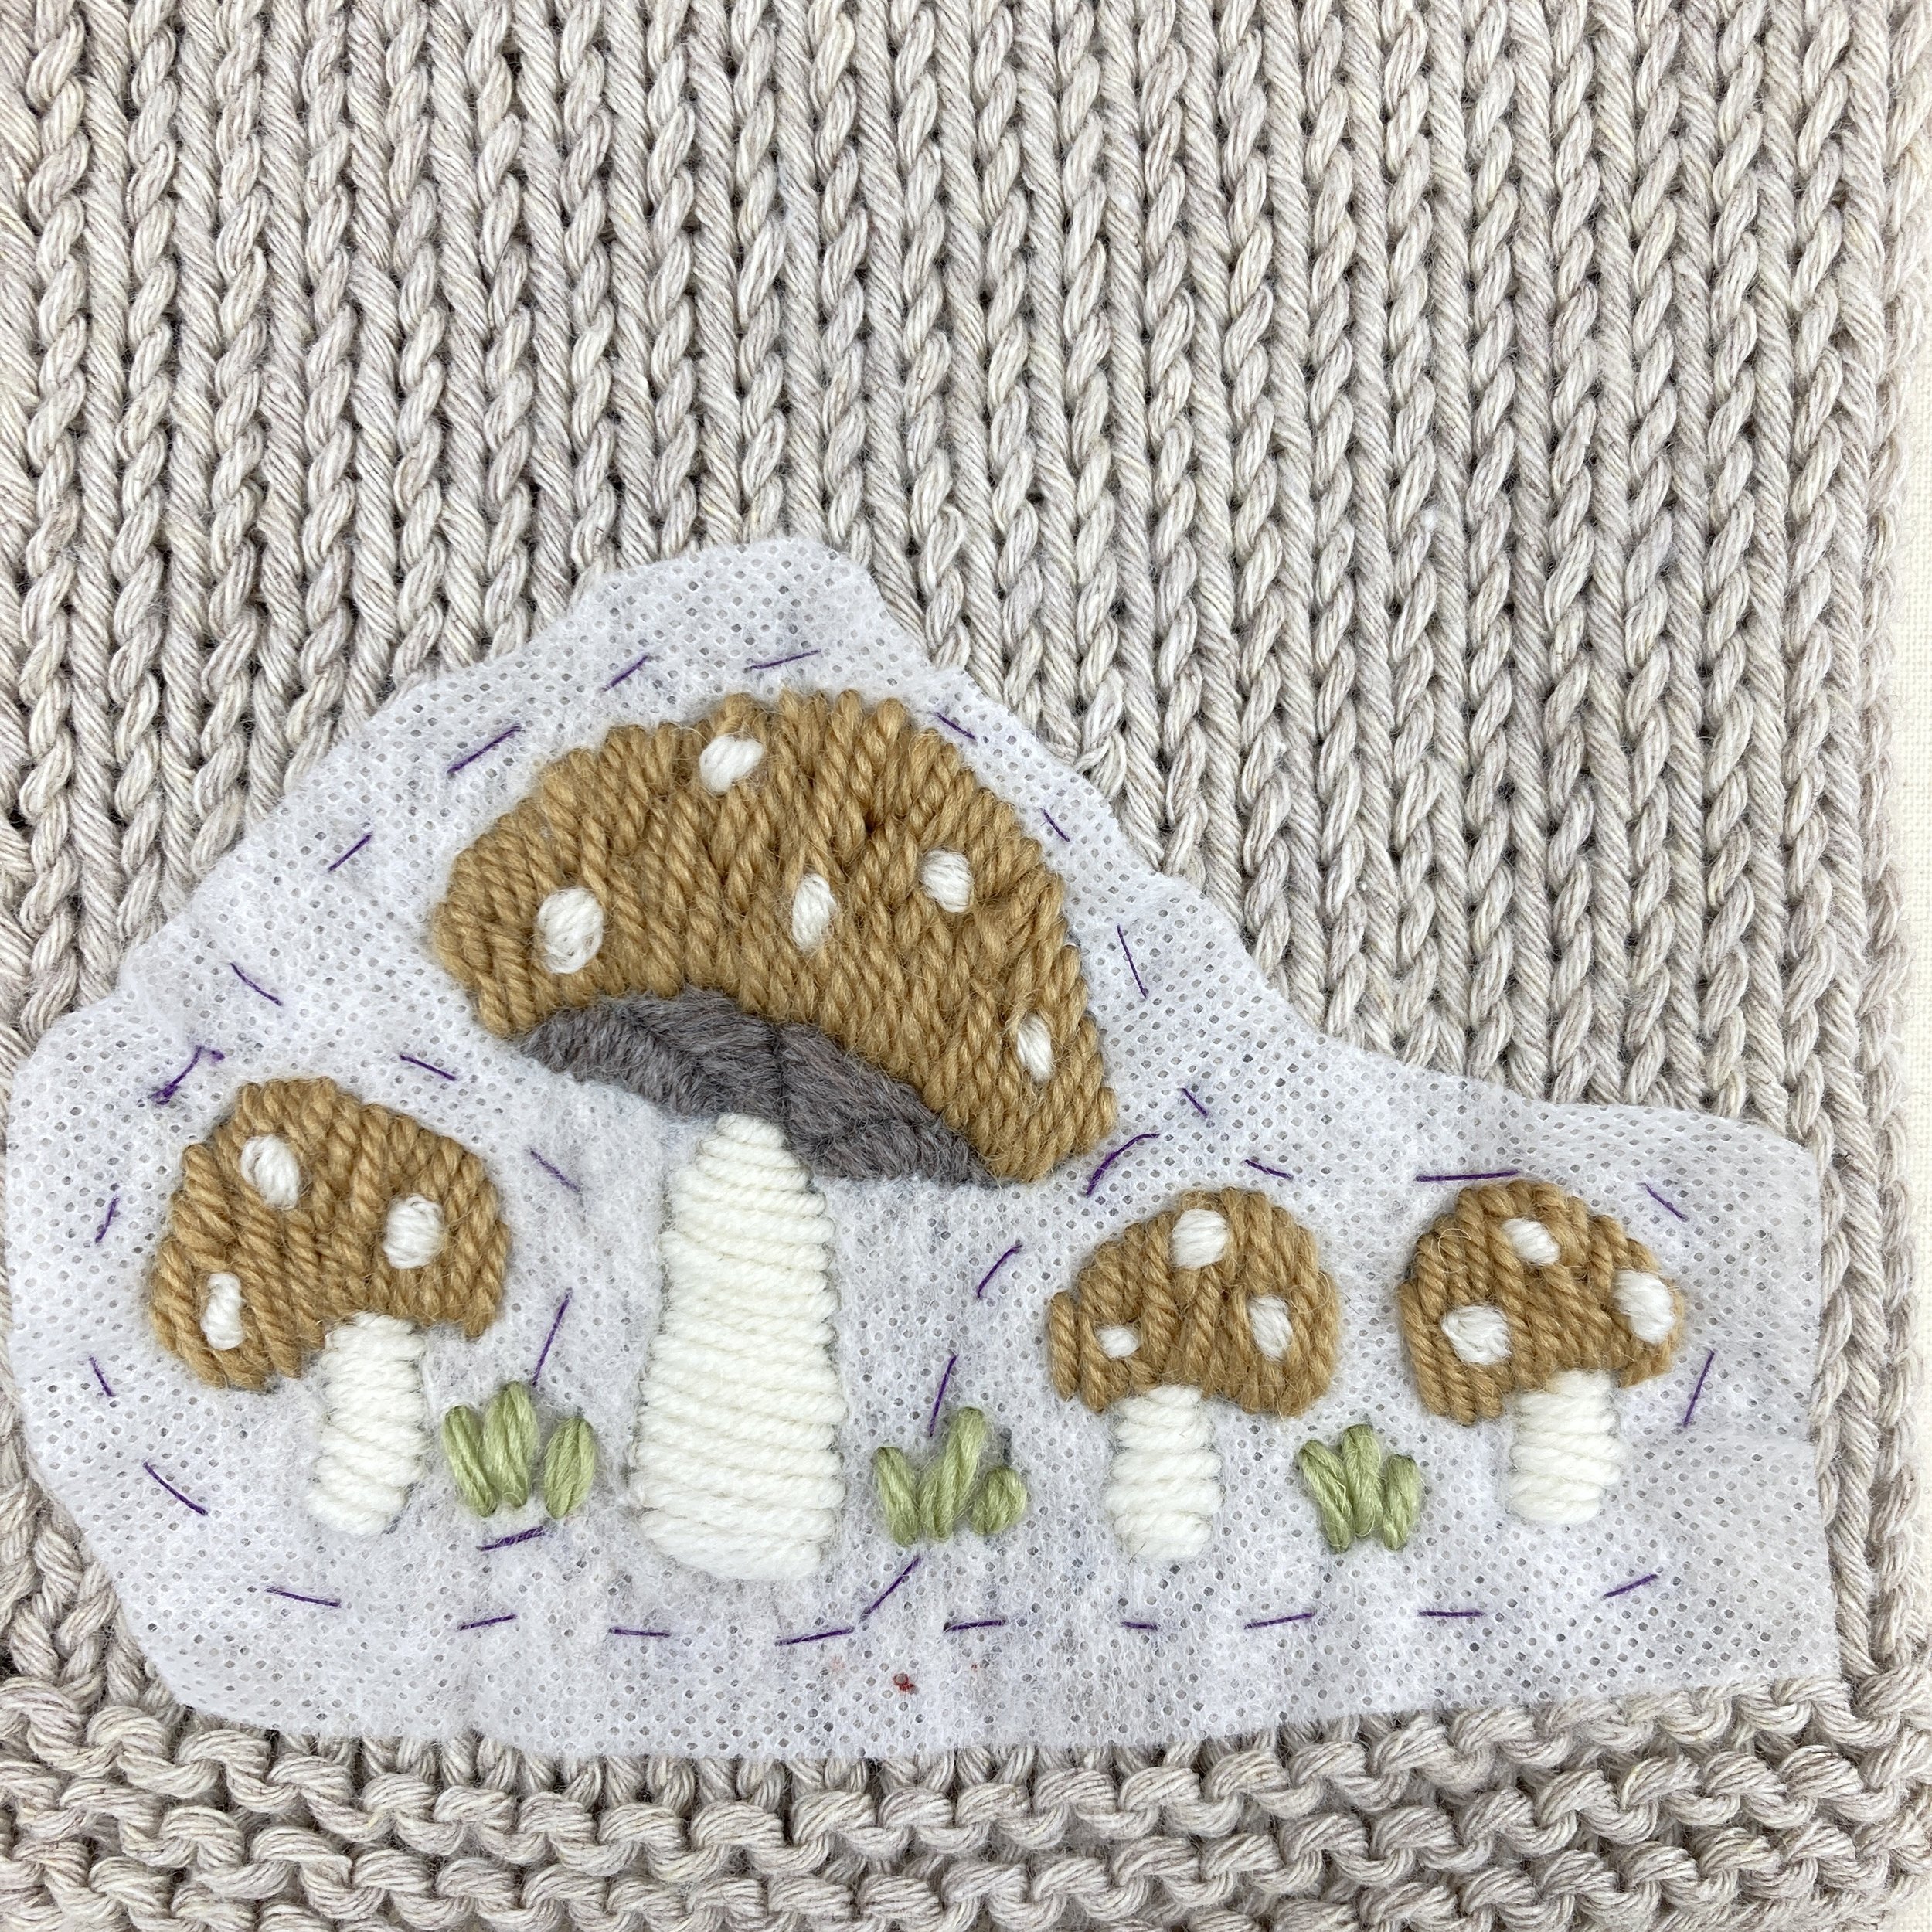 embroidery on knits.jpg